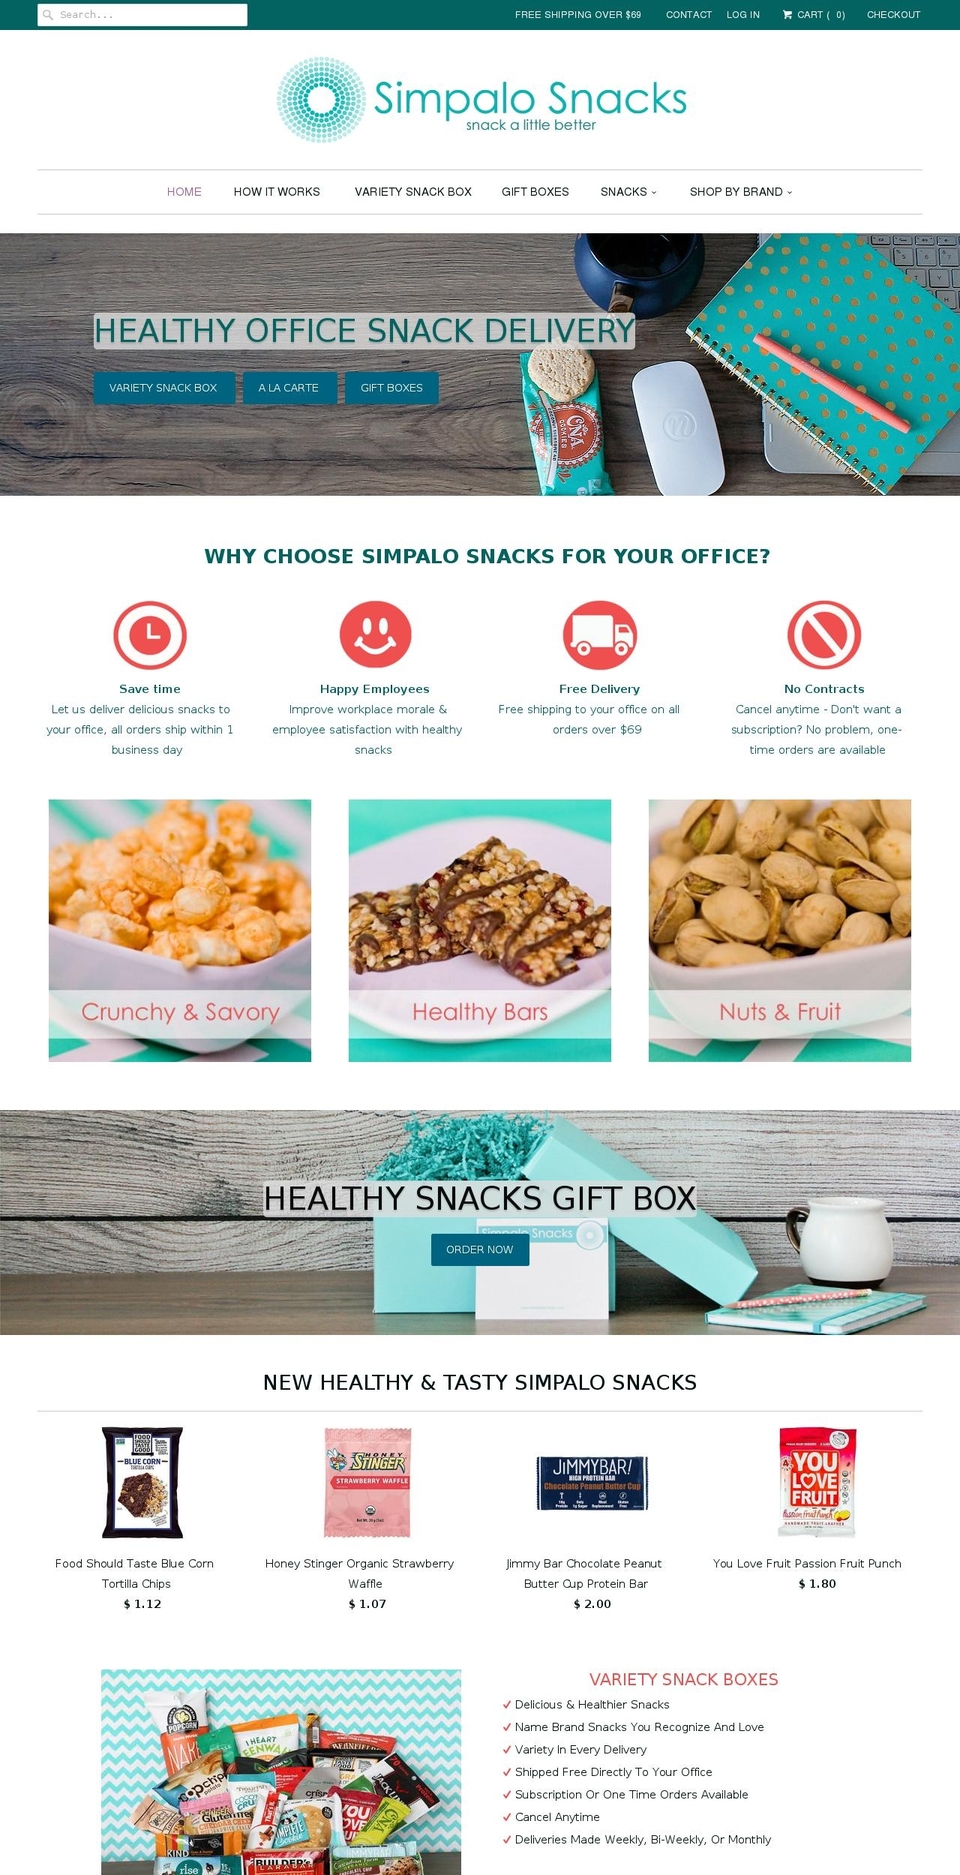 Gifts Shopify theme site example simpalosnacks.com